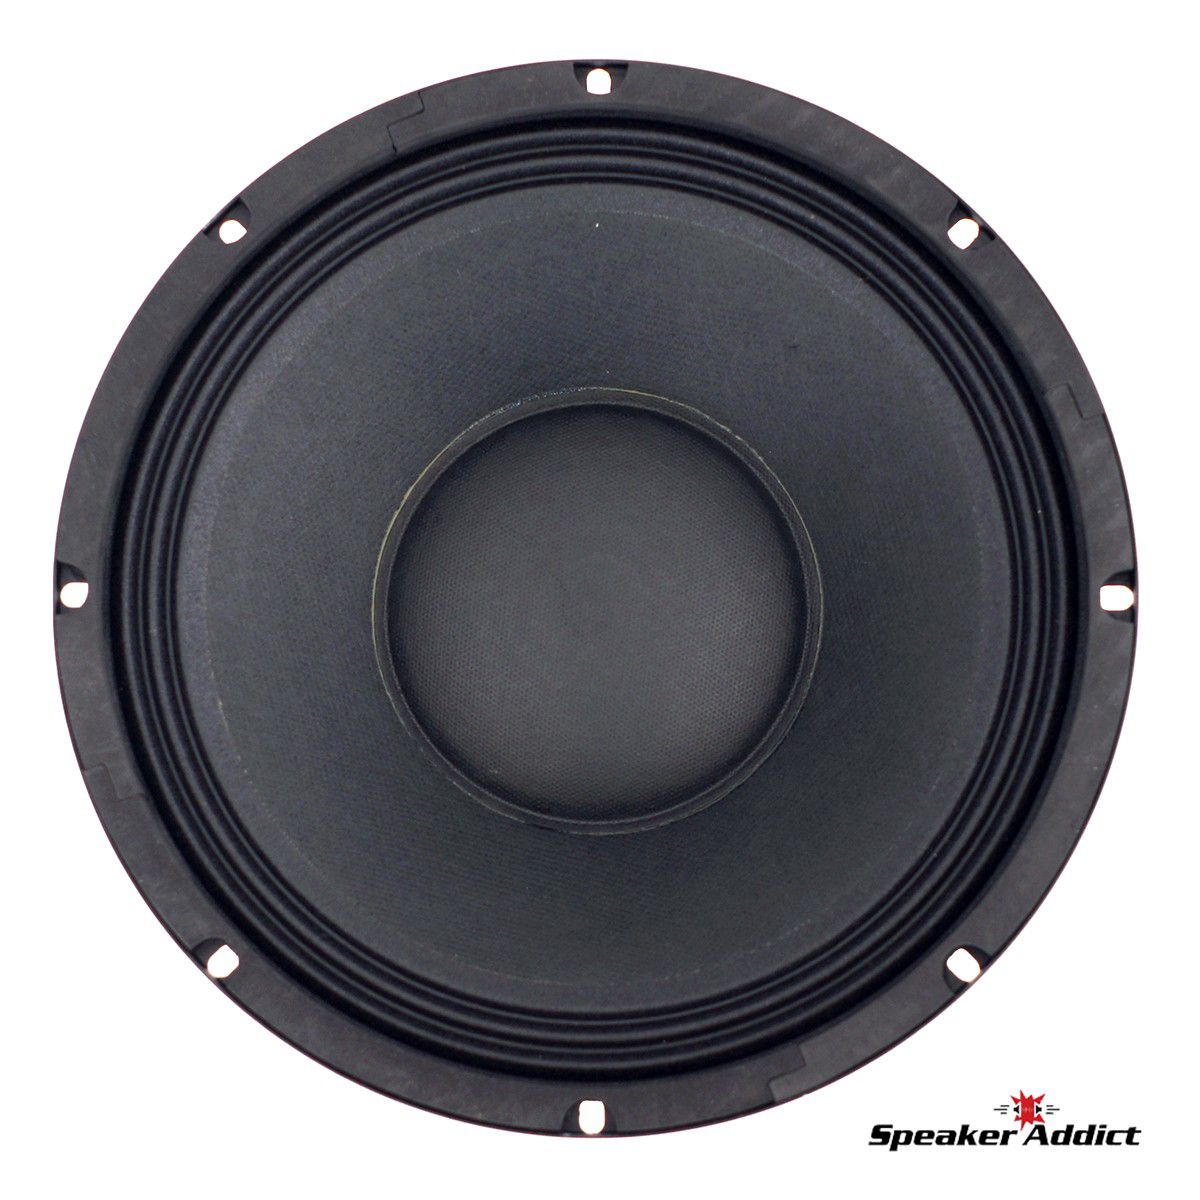 Brand new Peavey 10 inch Neo magnet woofer midbass 400w 95db, many available